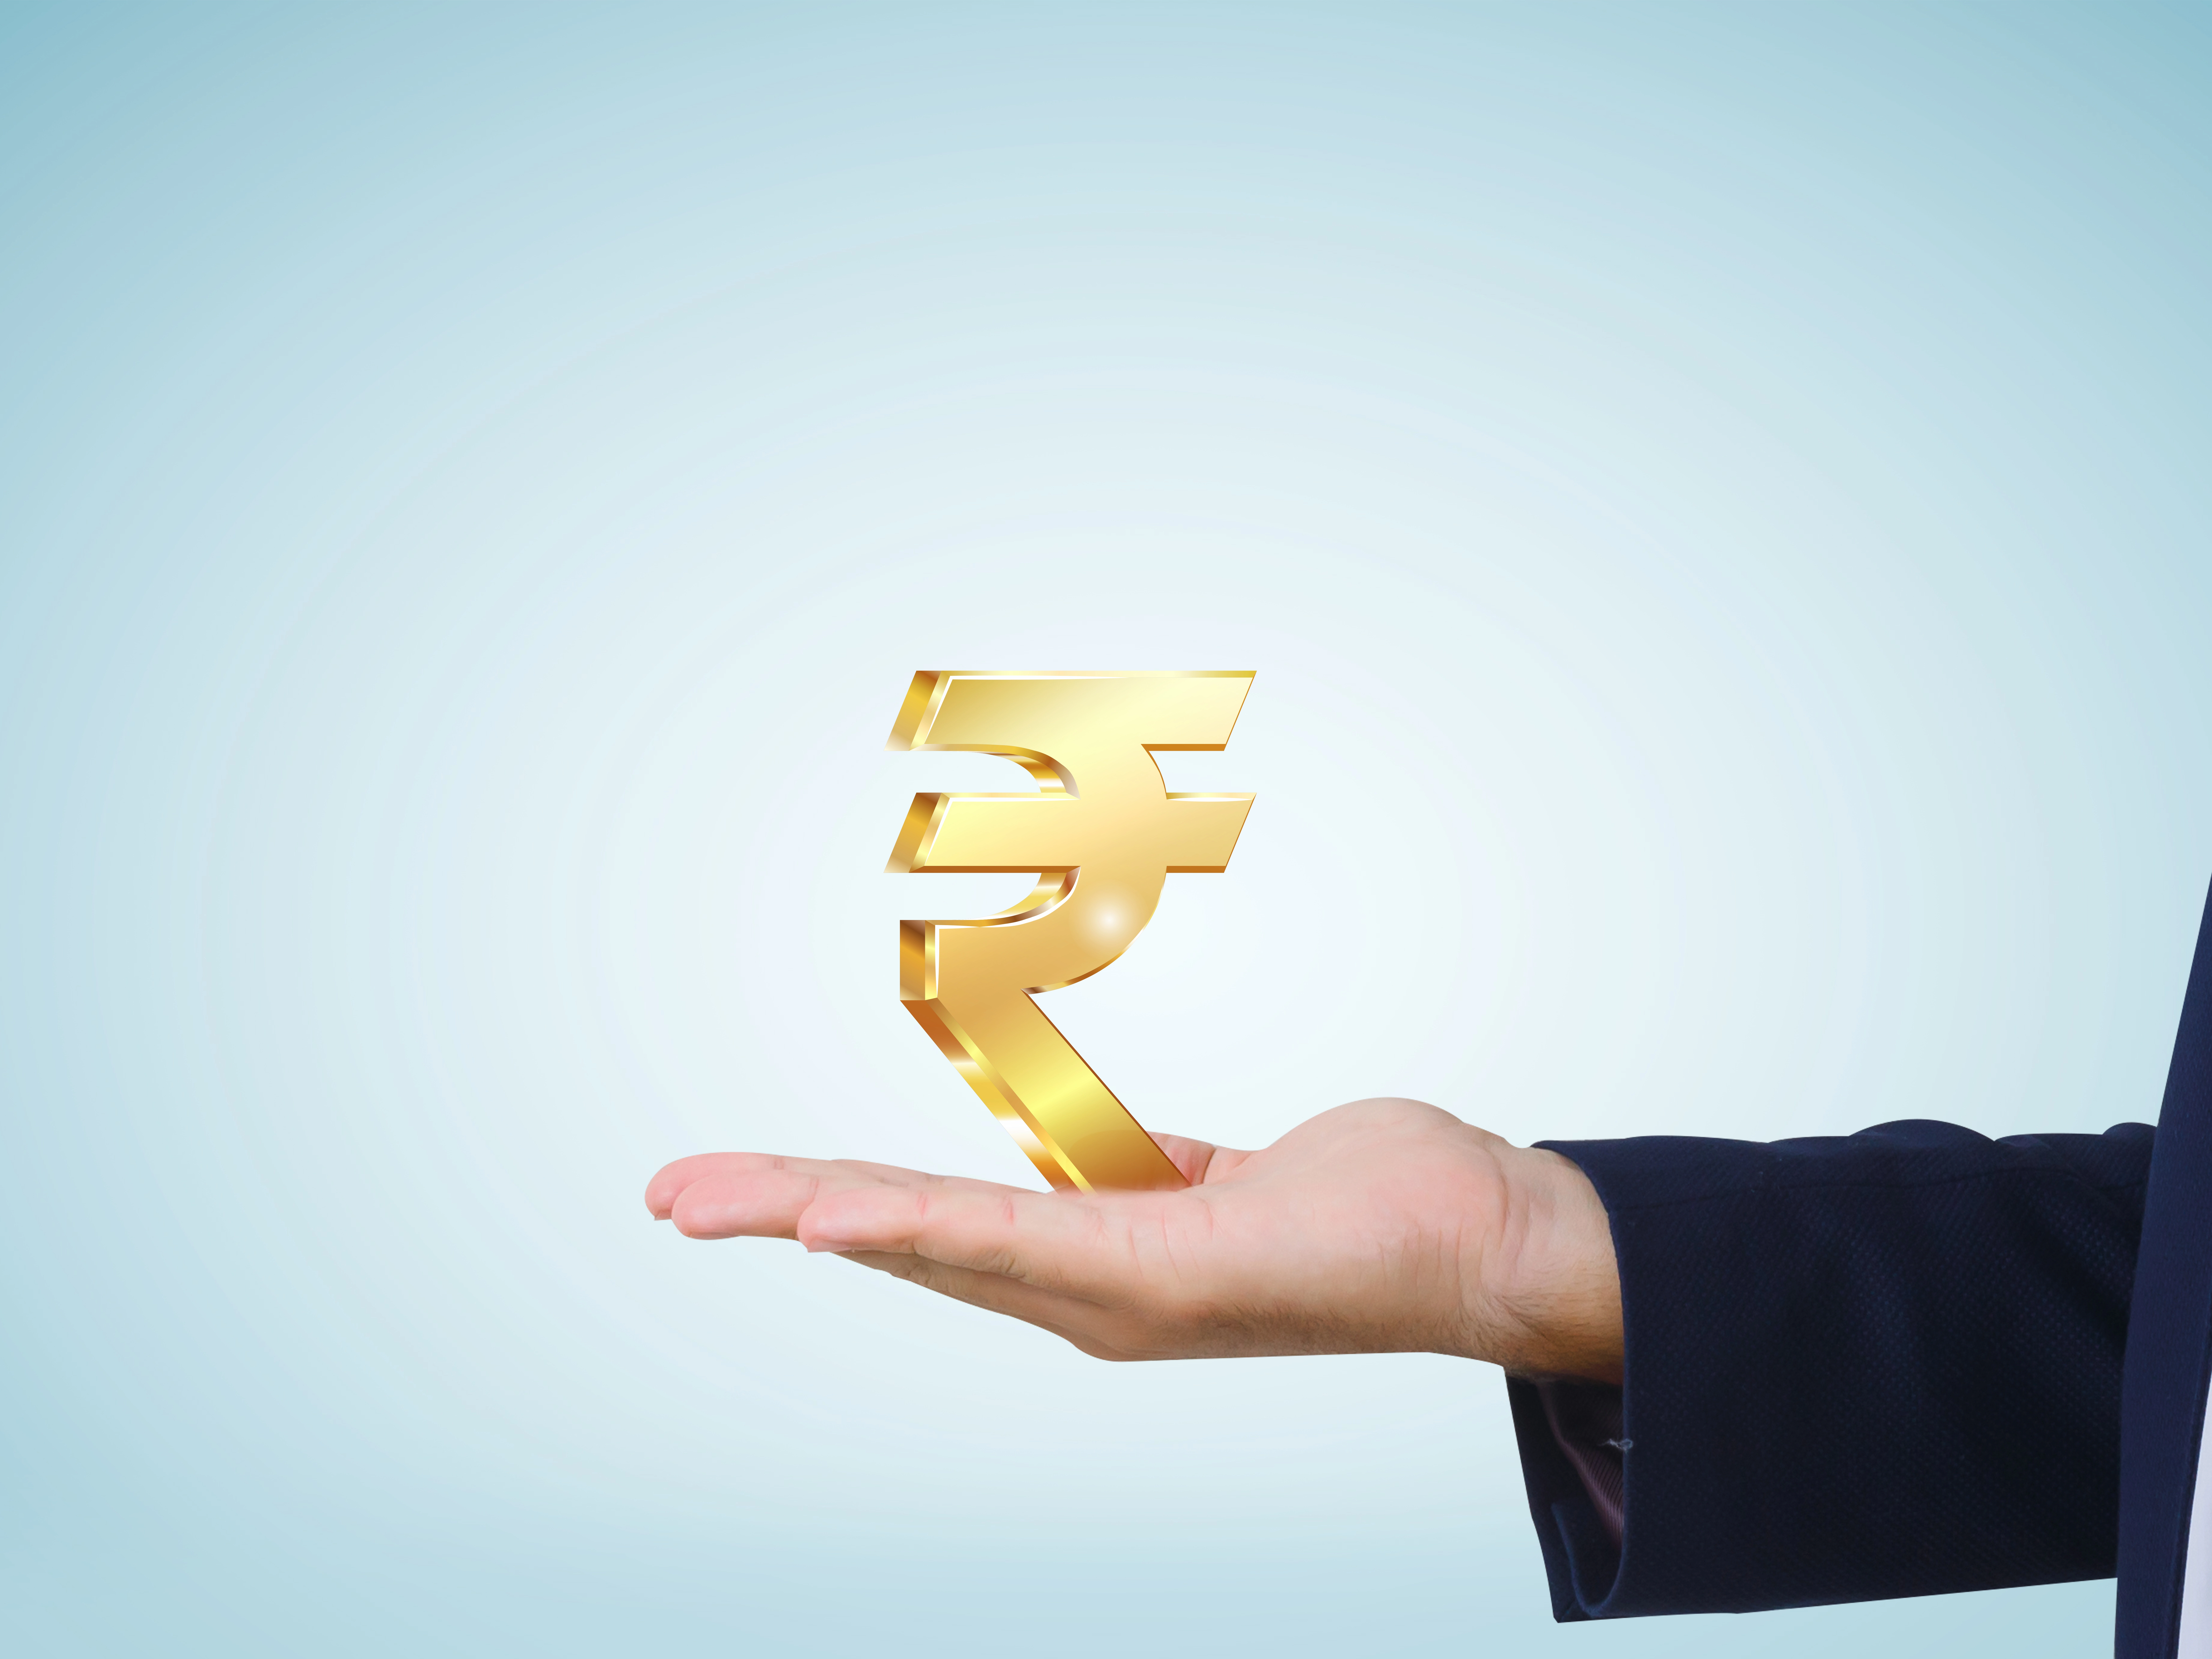 What are Some Top NBFCs in India That Provide SME Loans Real Quick? 